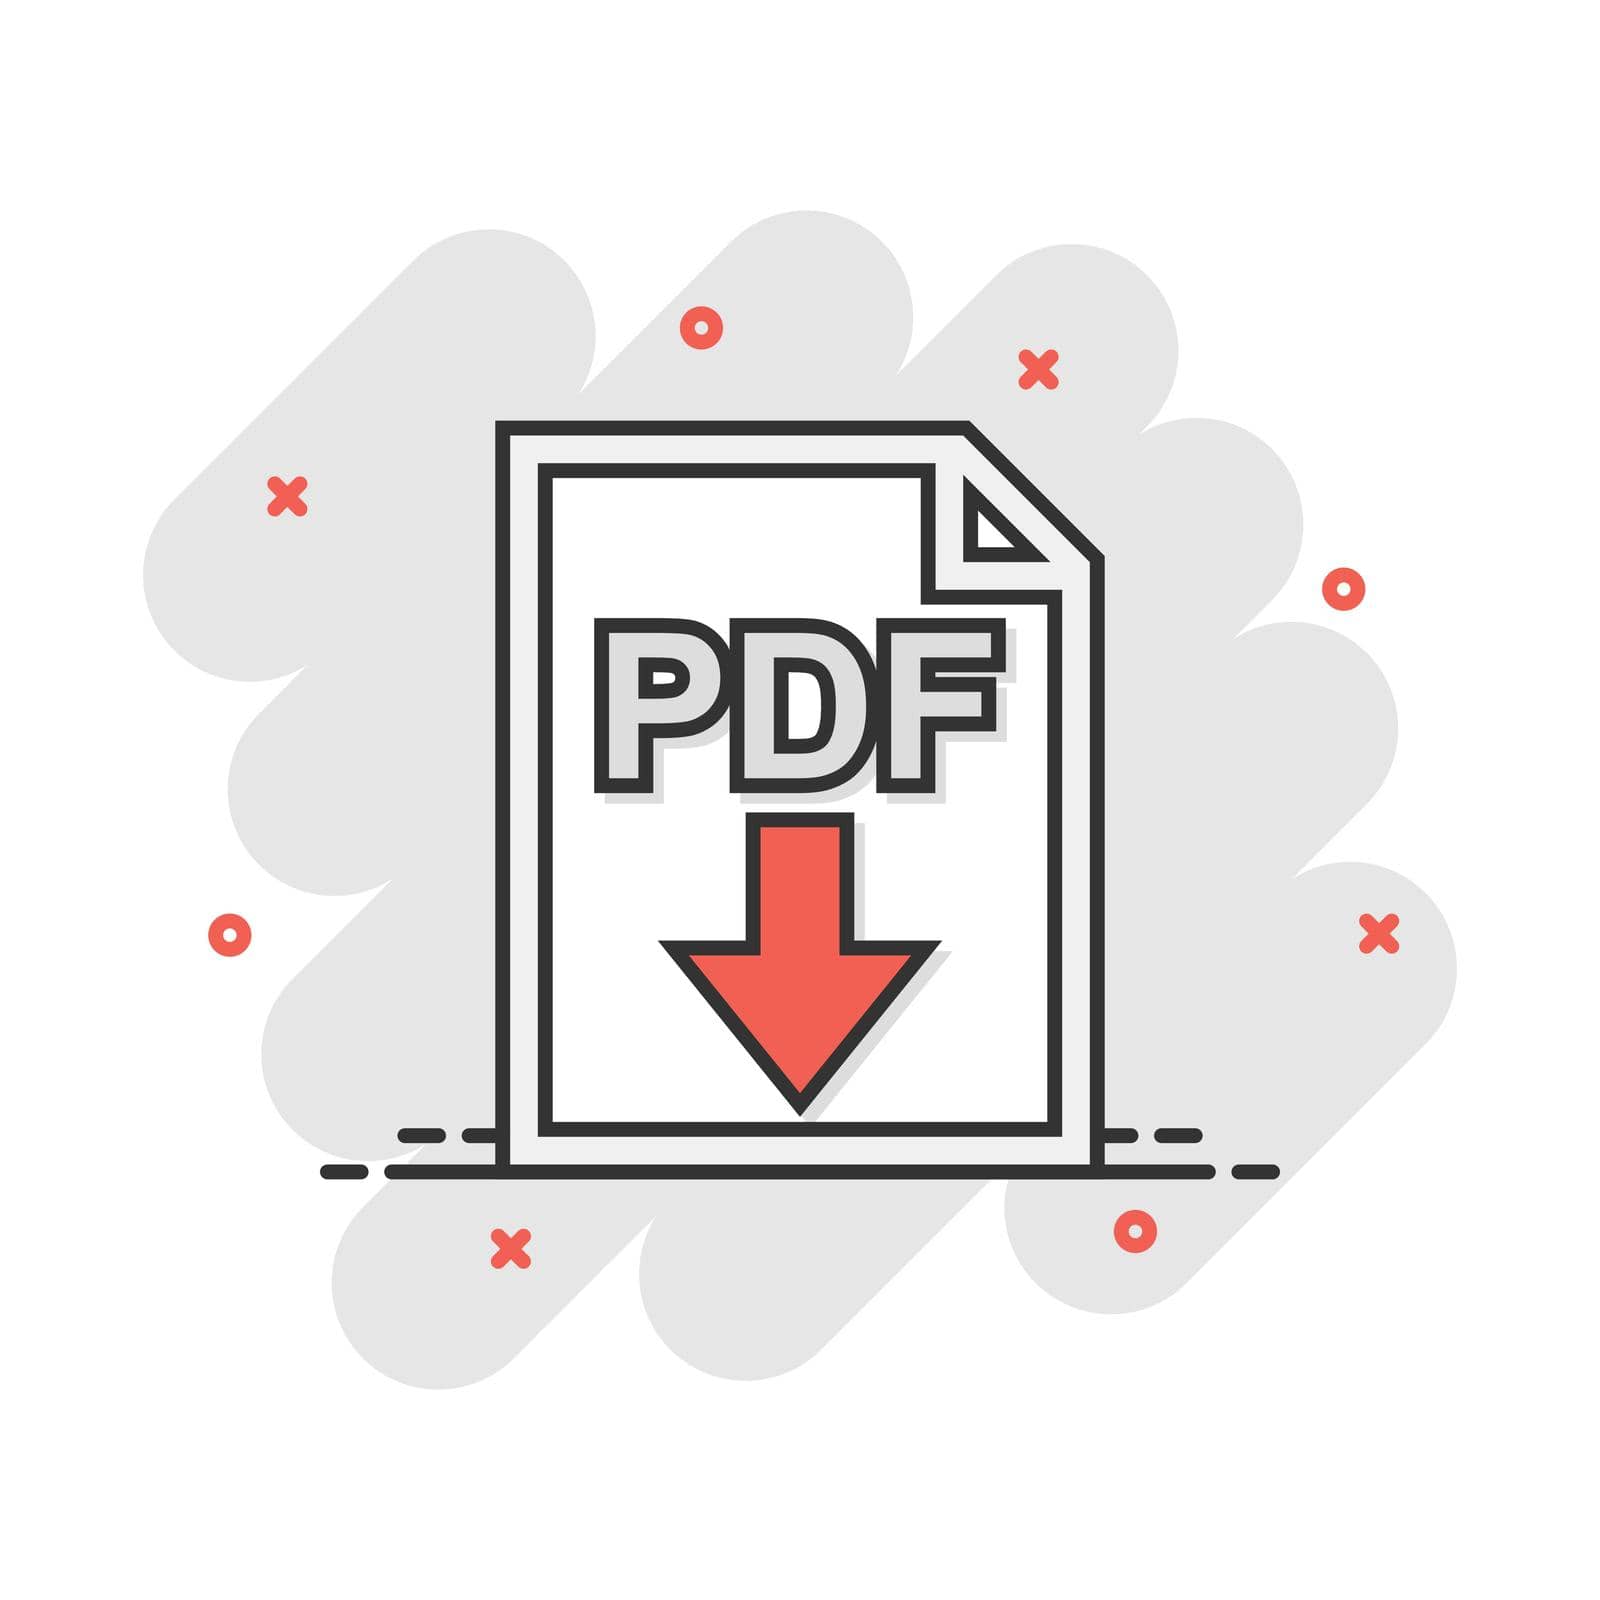 Cartoon PDF icon in comic style. Document illustration pictogram. File sign splash business concept. by LysenkoA